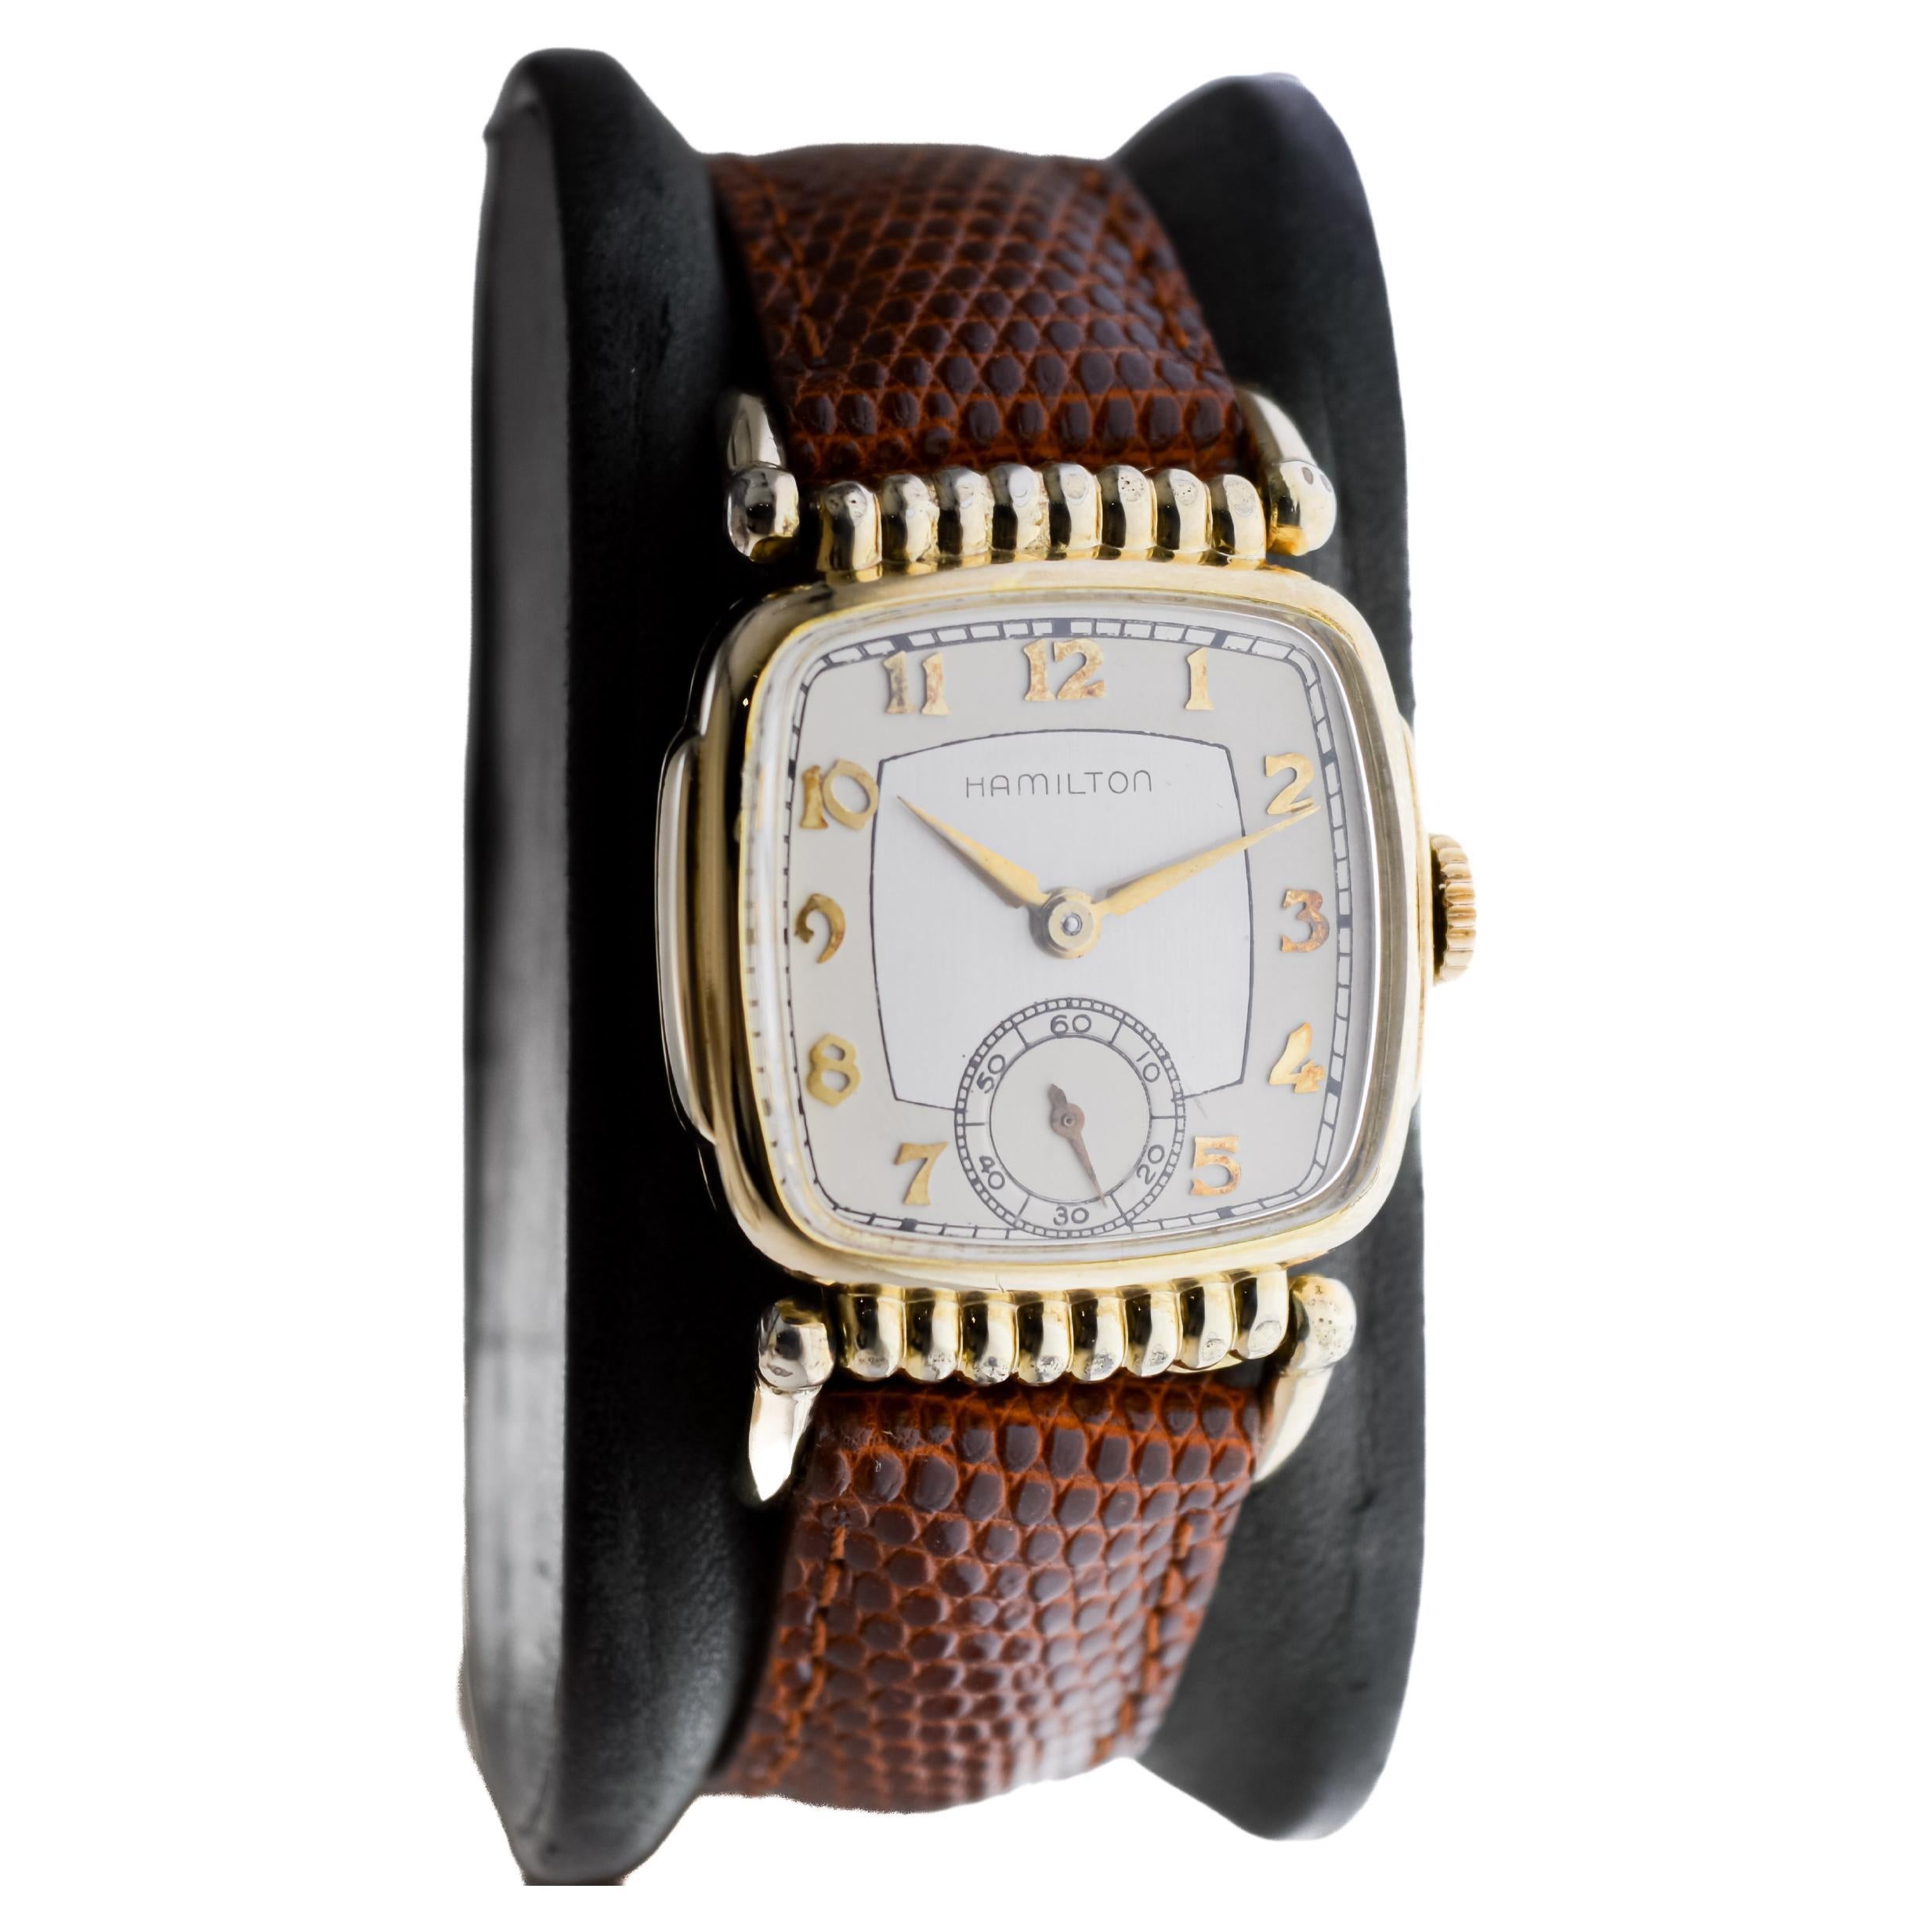 FACTORY / HOUSE: Hamilton Watch Company
STYLE / REFERENCE: Art Deco / Articulated Case
METAL / MATERIAL: Yellow Gold-Filled
CIRCA / YEAR: 1940's
DIMENSIONS / SIZE: Length 51mm X Width 27mm
MOVEMENT / CALIBER: Manual Winding / 17 Jewels / Caliber